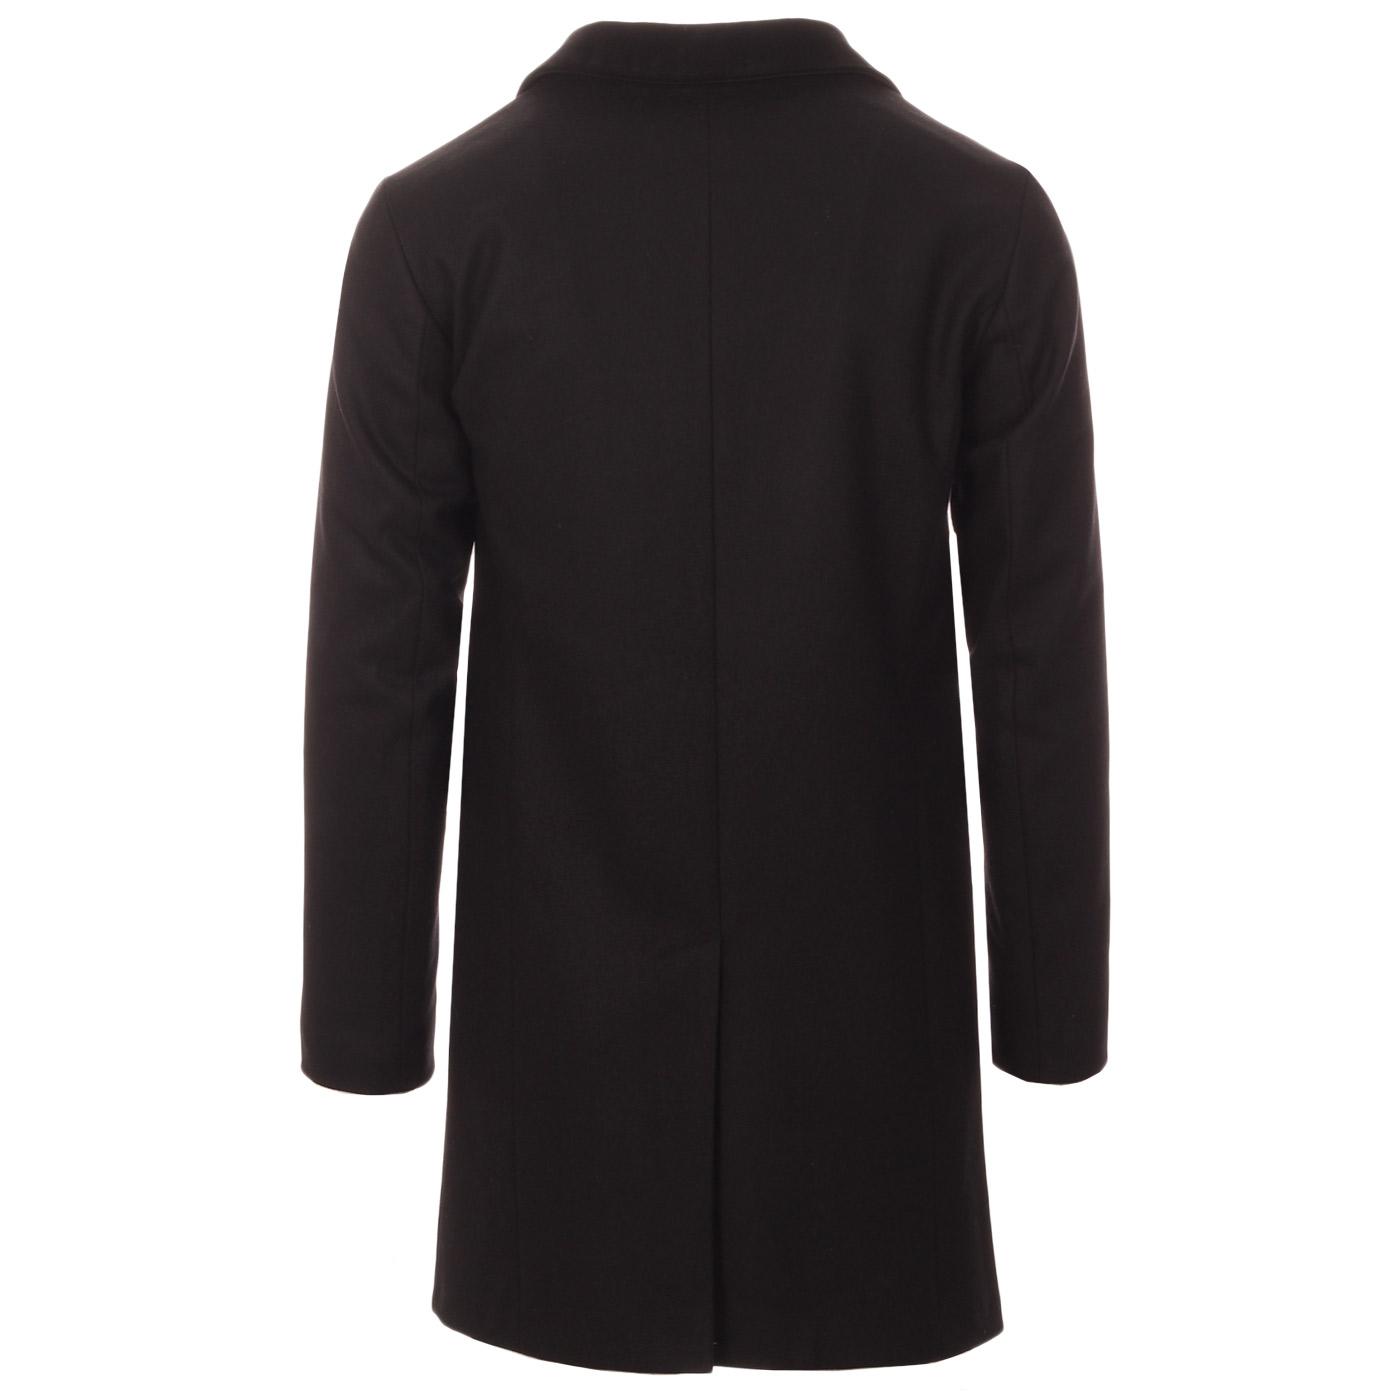 MADCAP ENGLAND Made in England Mod Covert Coat in Black